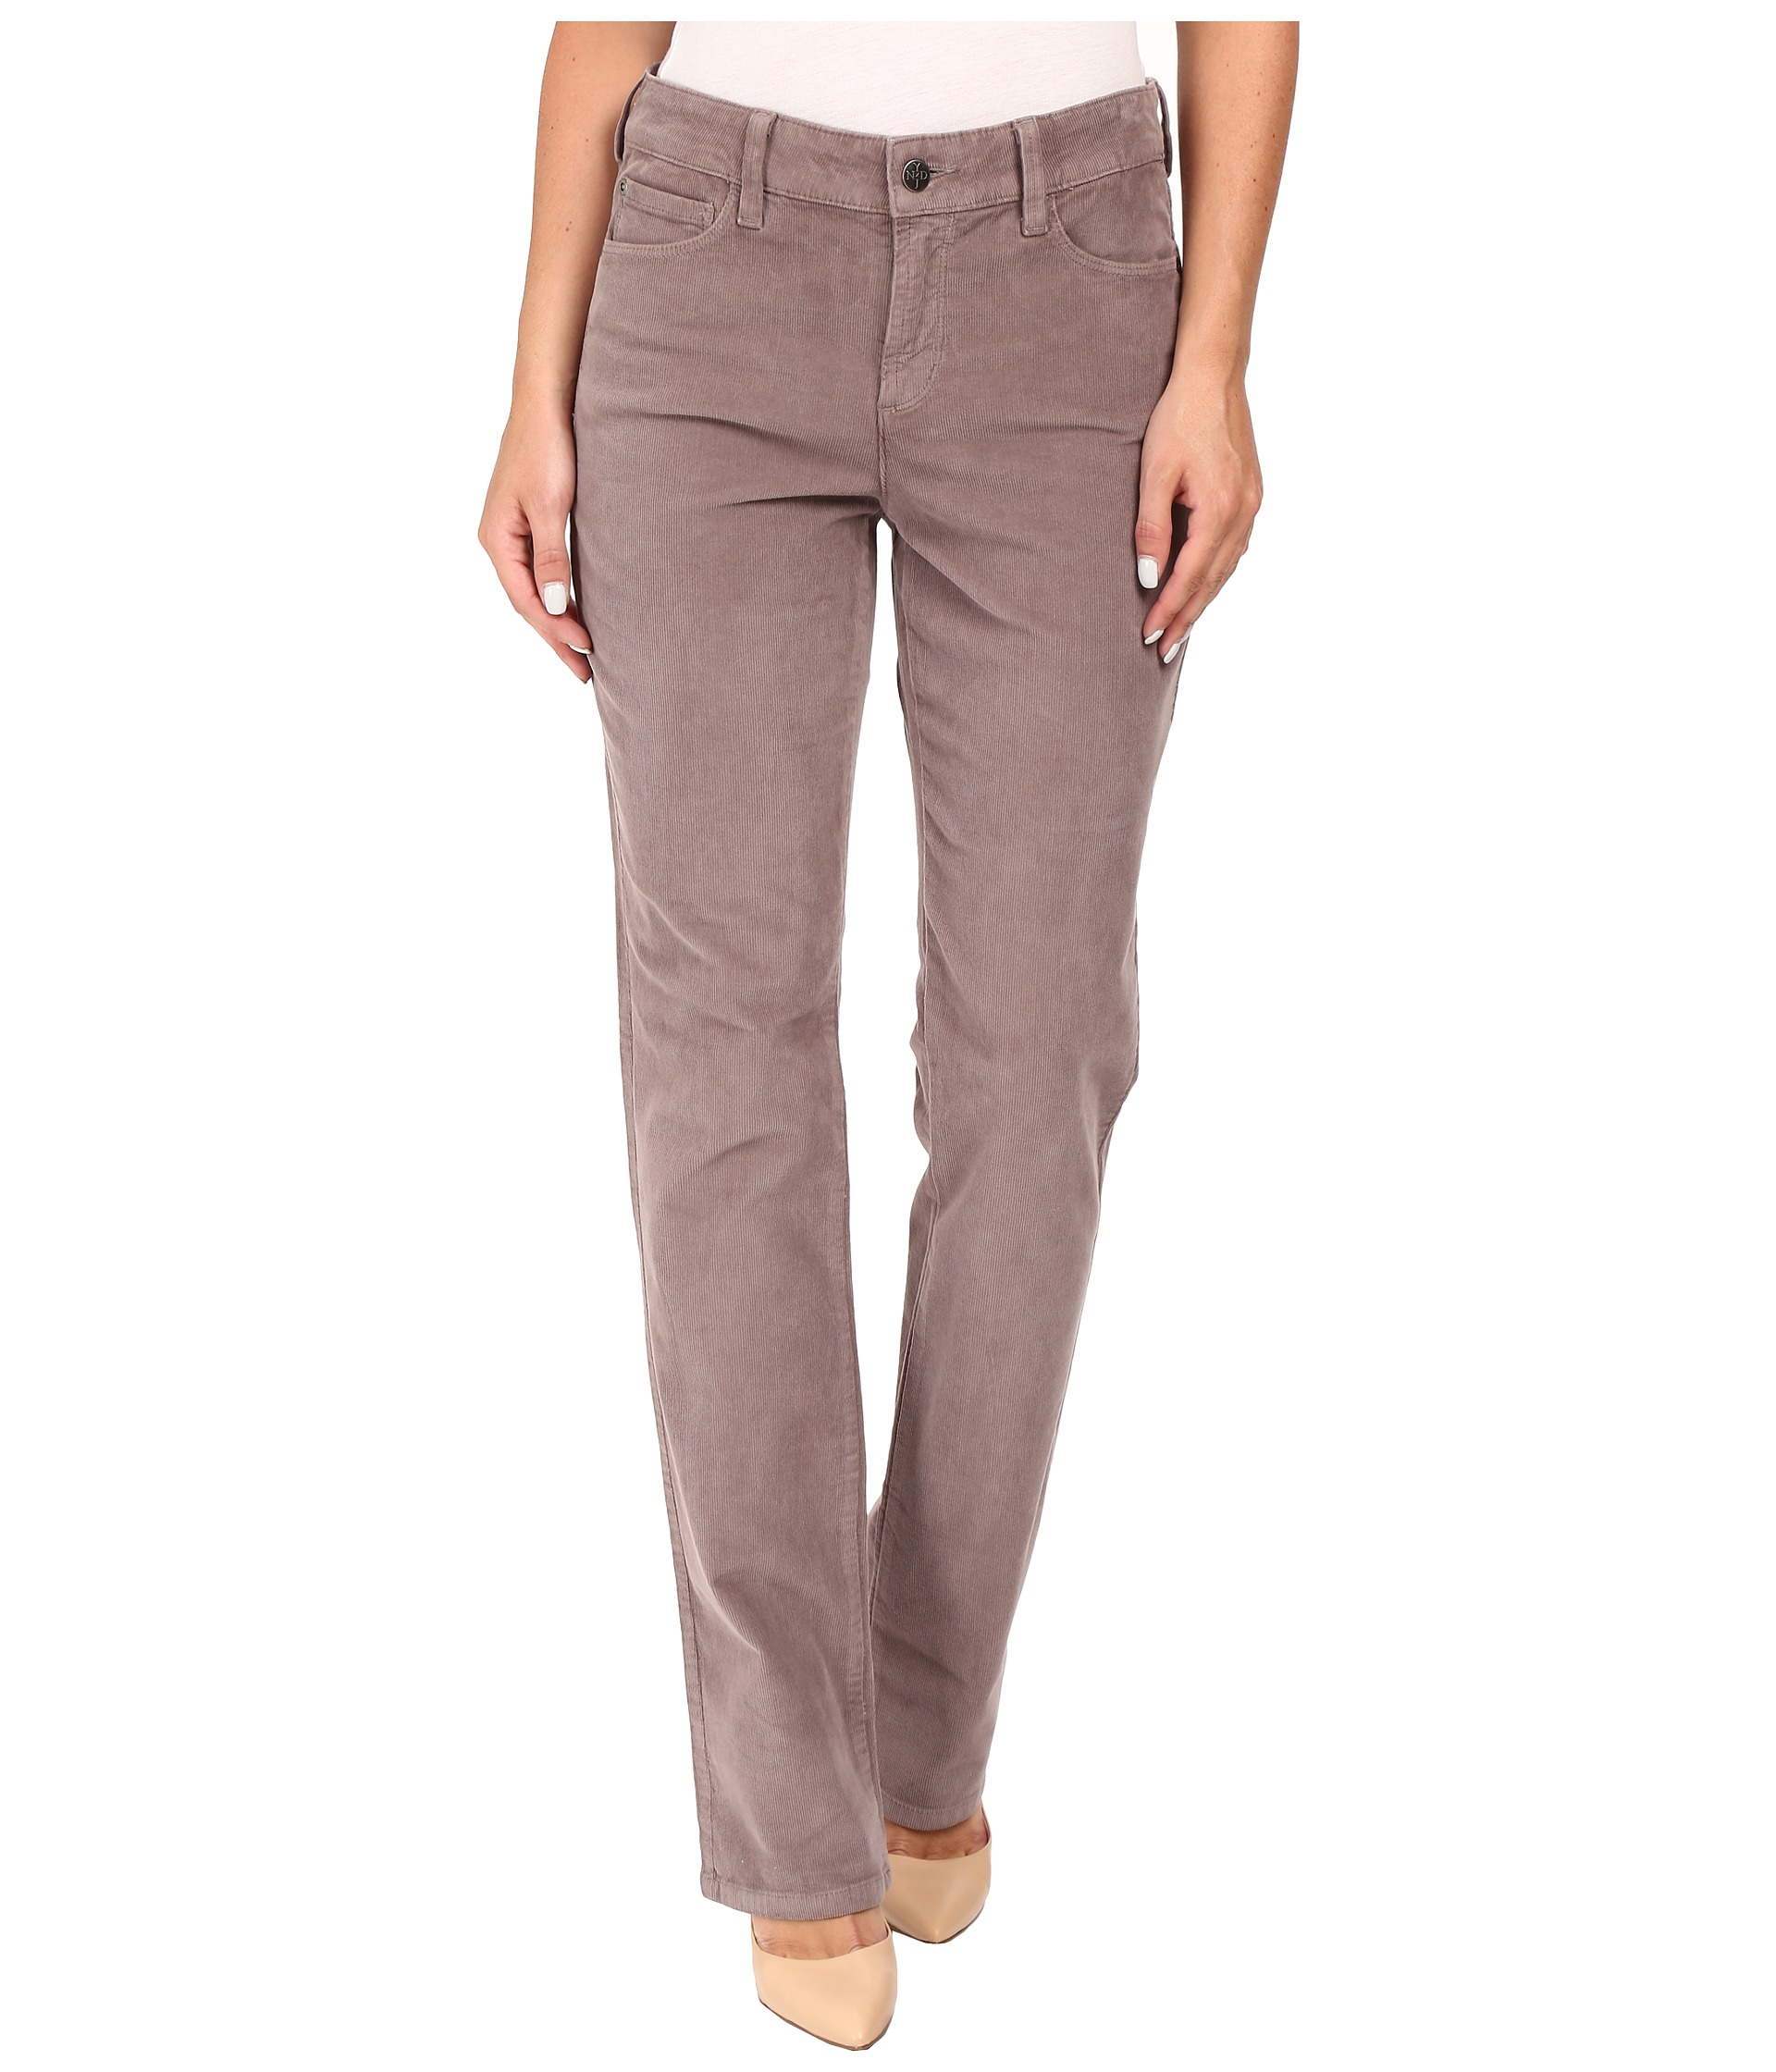 NYDJ Marilyn Straight Jeans in Corduroy - Zappos.com Free Shipping BOTH ...